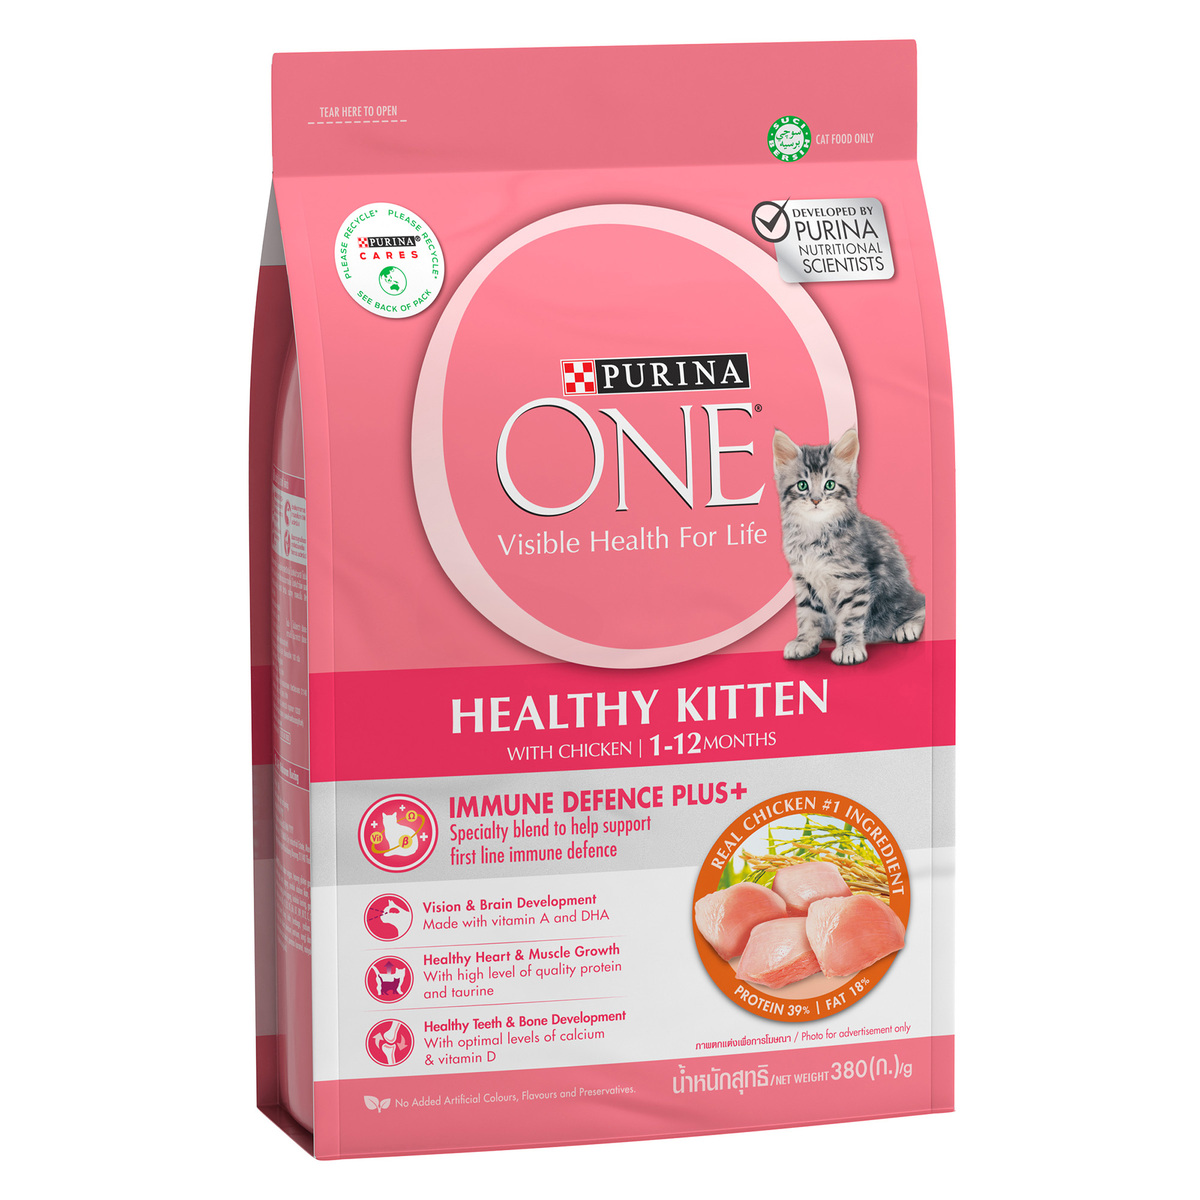 Purina One Healthy Kitten Catfood With Chicken For 1-12 Months, 380 g